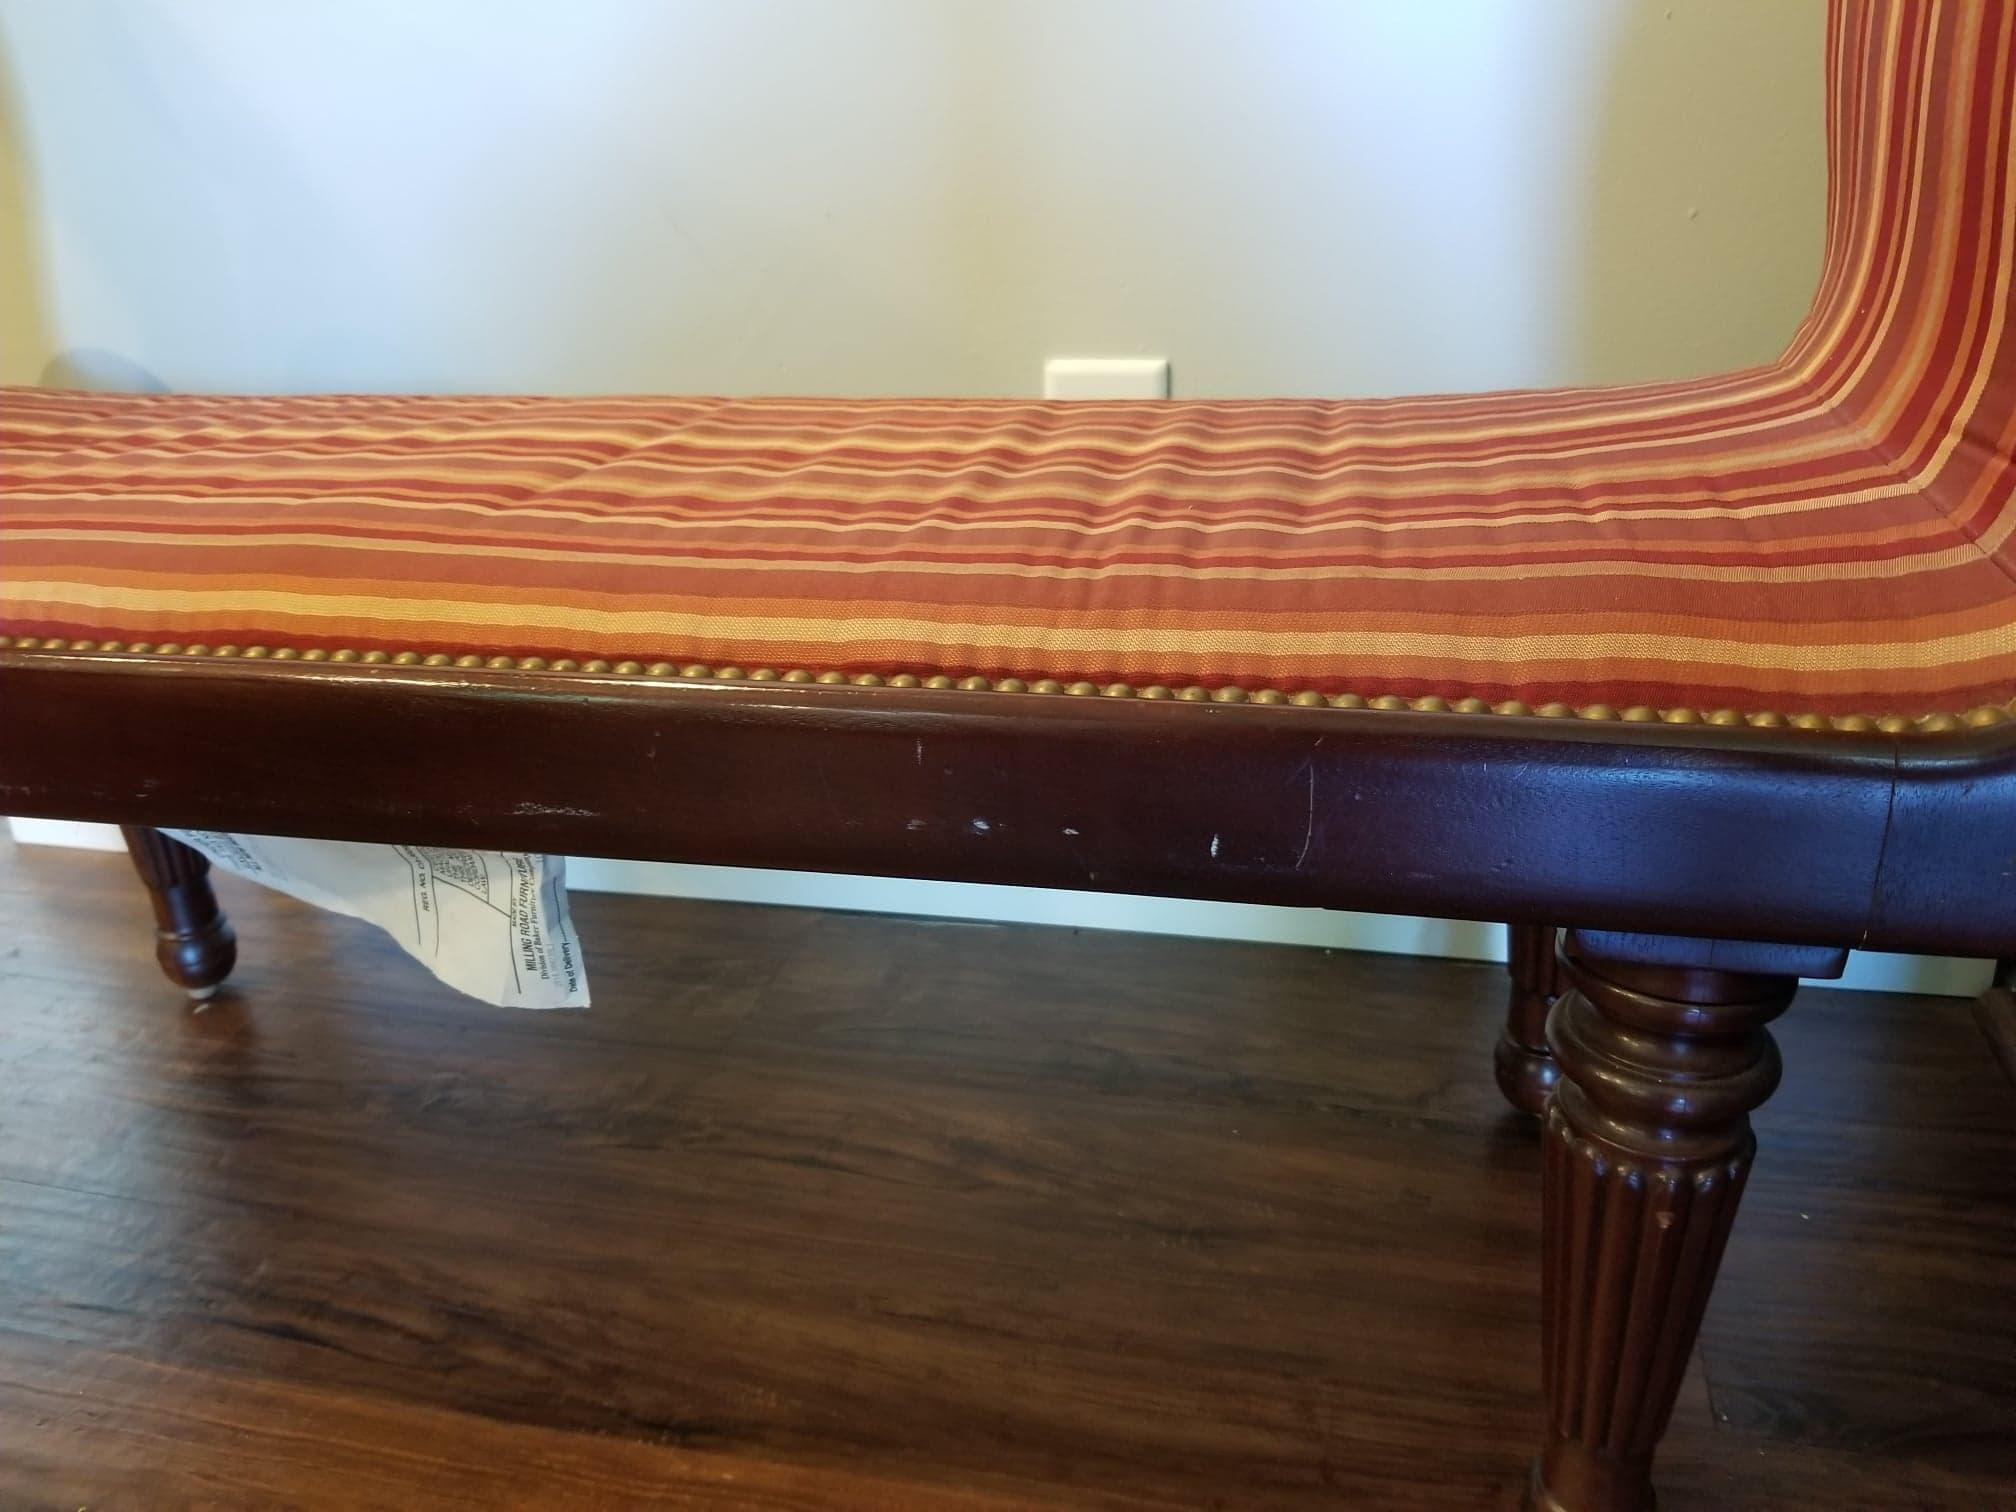 Neoclassical Revival Baker Limited Edition Thomas Pheasant Milling Road Upholstered Bench For Sale